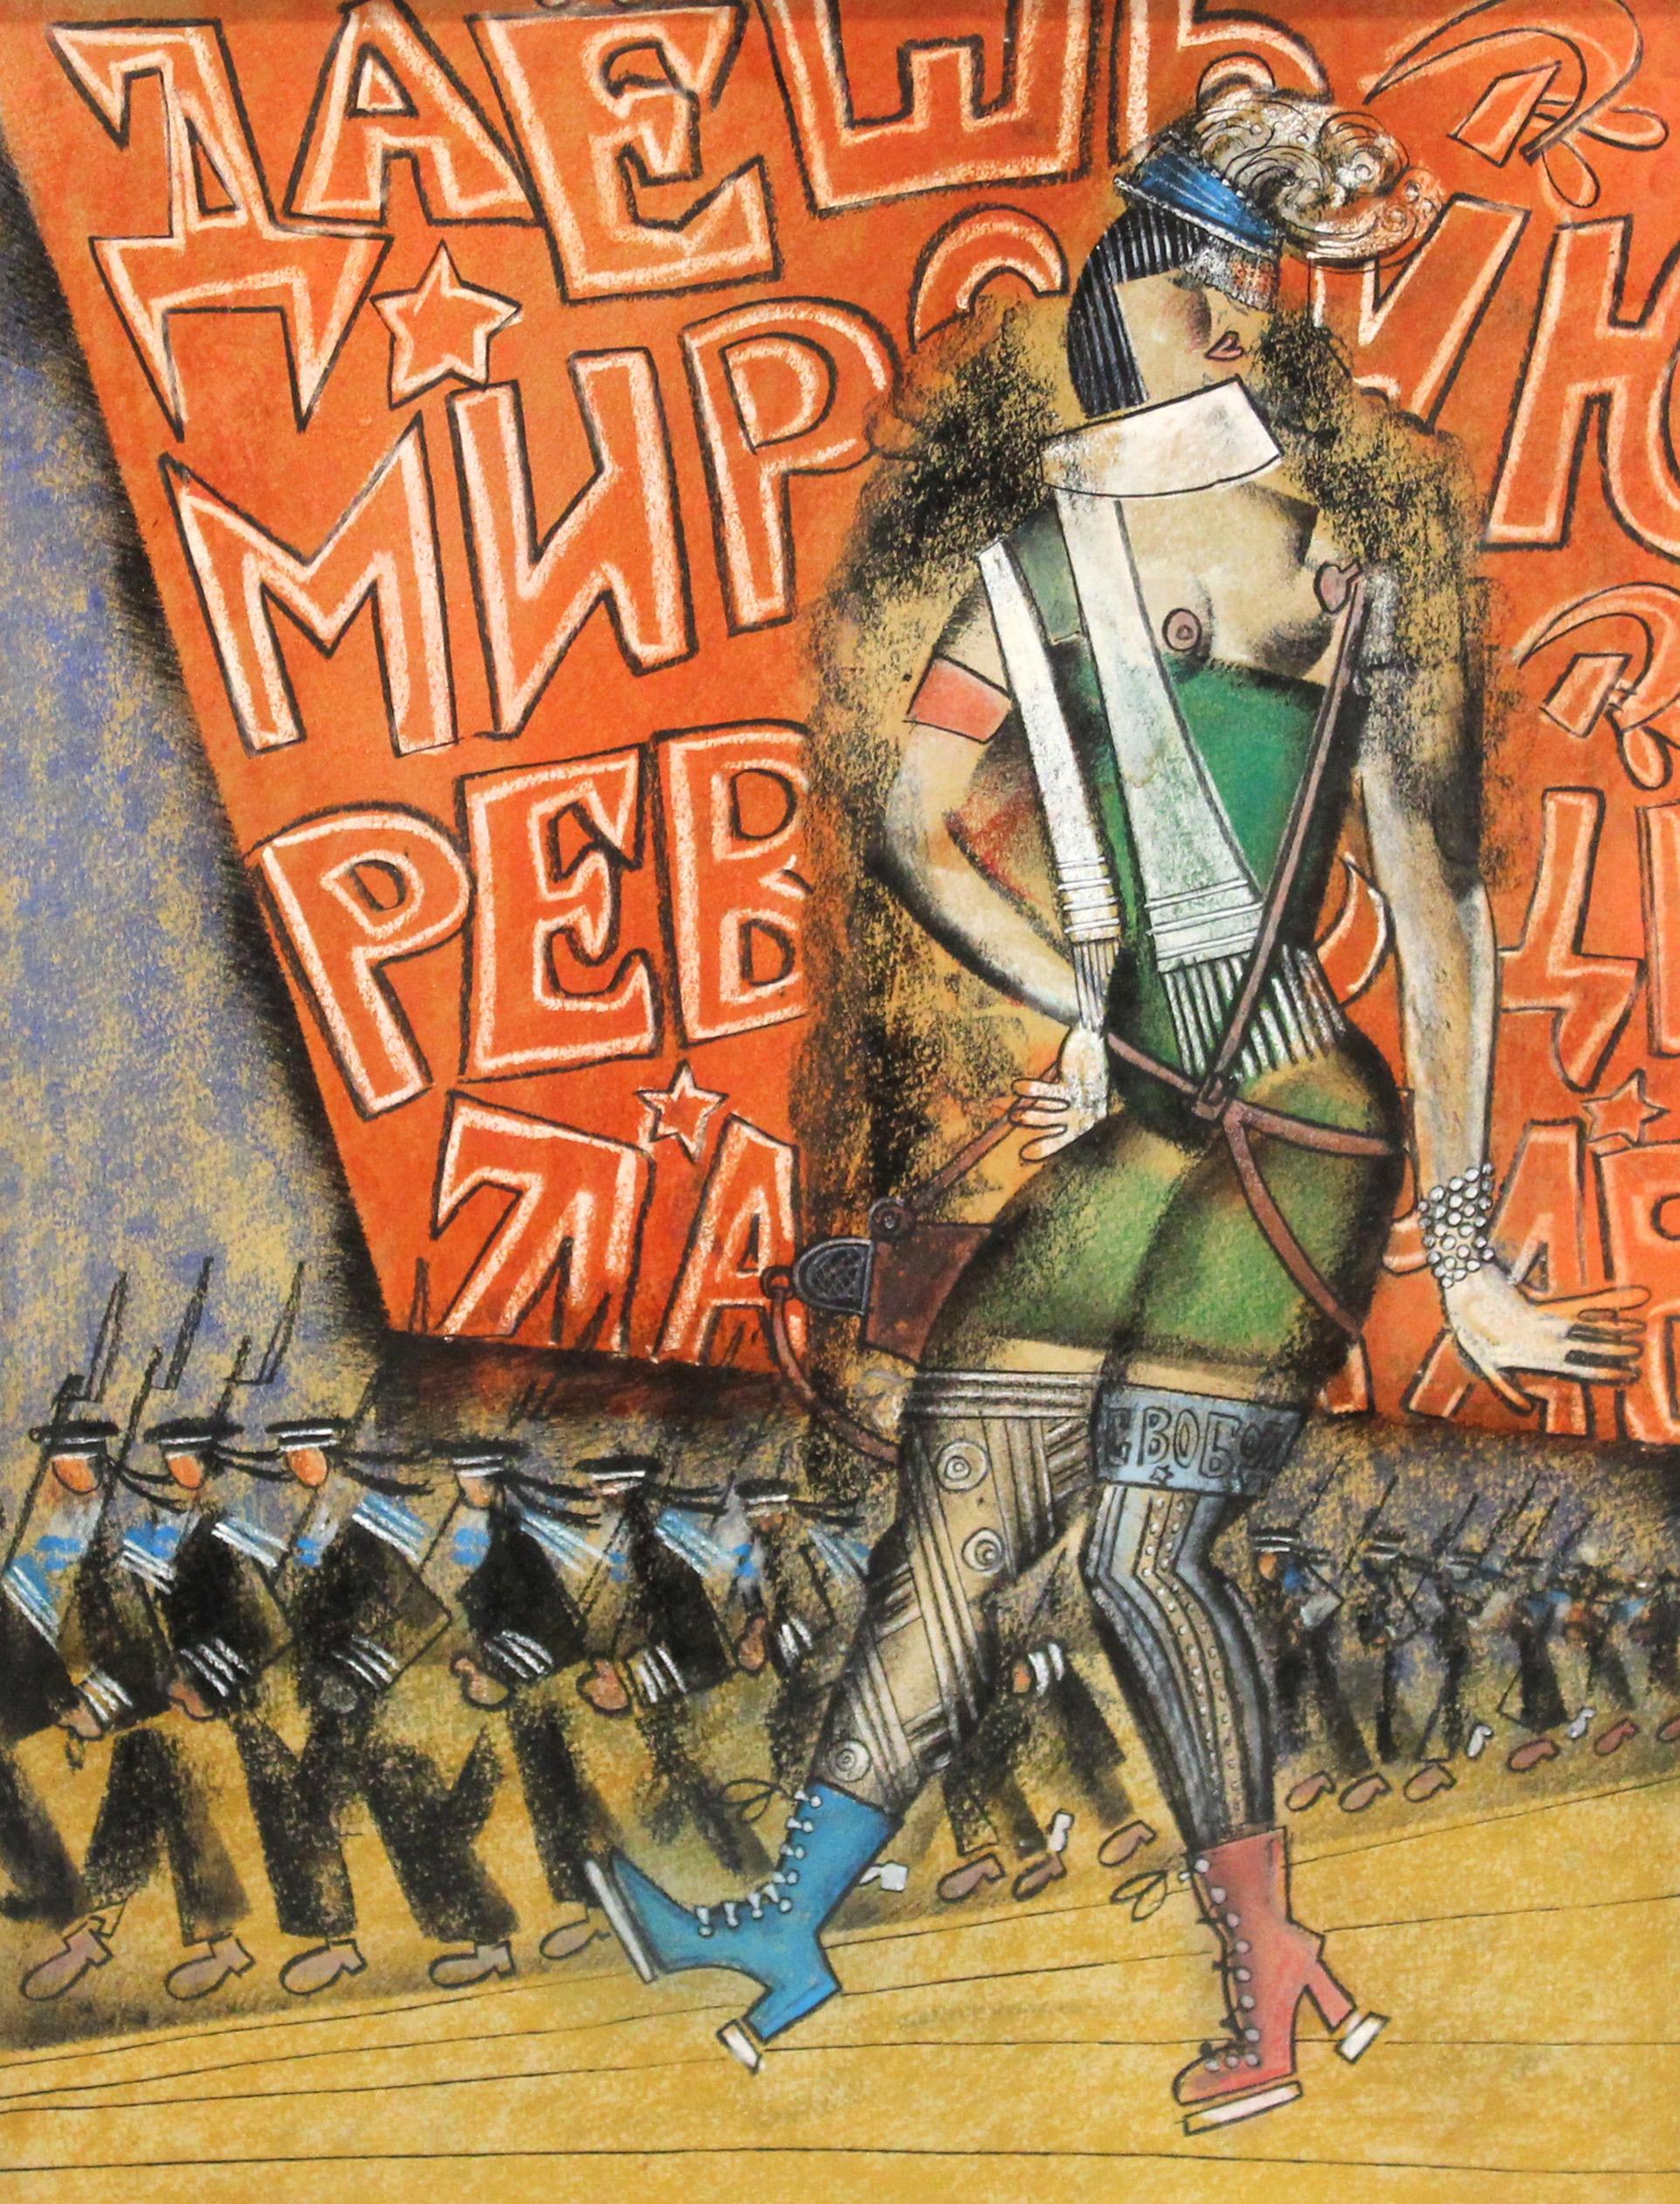 Vladimir Lebedev (1891 - 1967) Russian Avant-Garde mixed media work on paper (ink, gouache, pencil) depicting a semi-nude working girl parading in front of a group of marching sailors. The piece includes visible elements of Bolshevik propaganda and